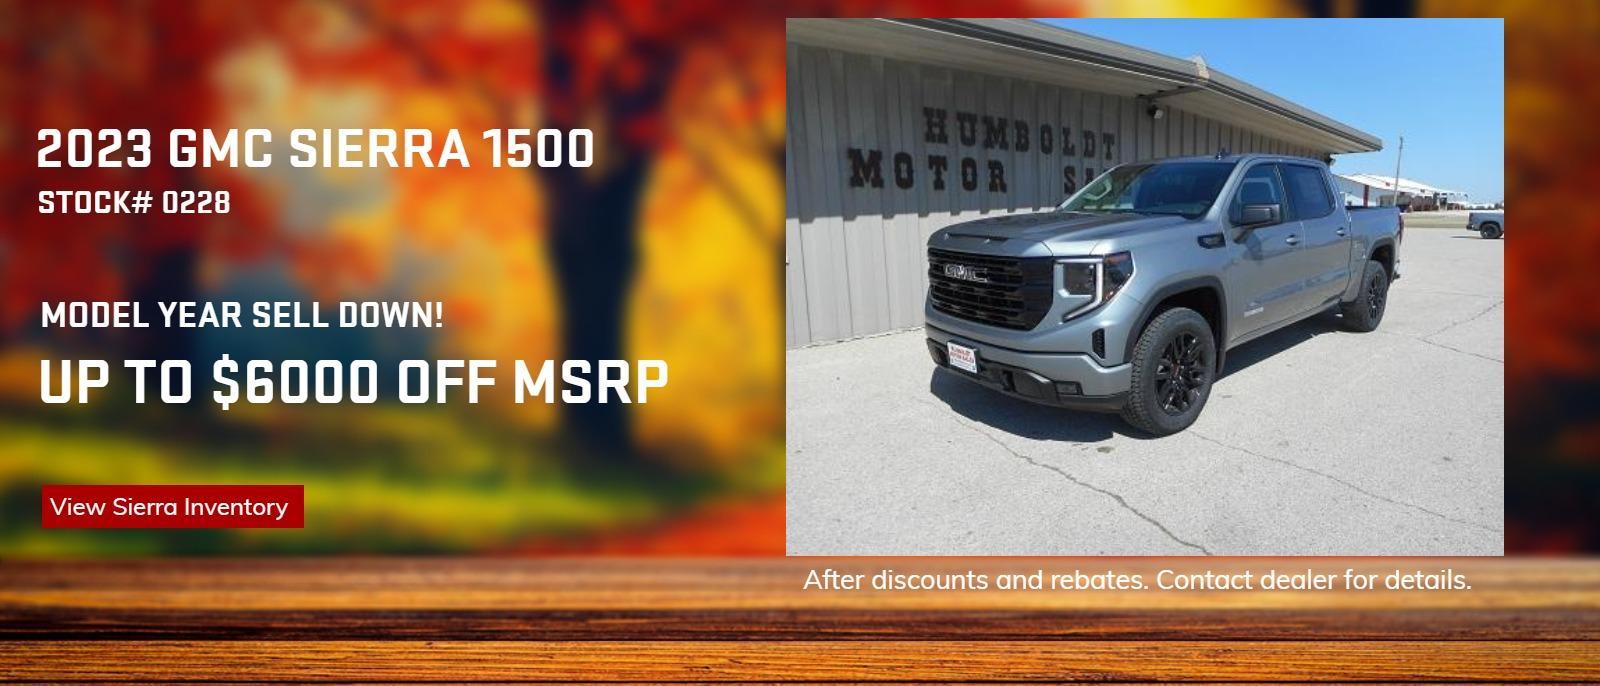 2023 GMC Sierra 1500
Stock# 0228

Model Year Sale!
Up to $6000 OFF MSRP*

*After discounts and rebates. Contact dealer for details.